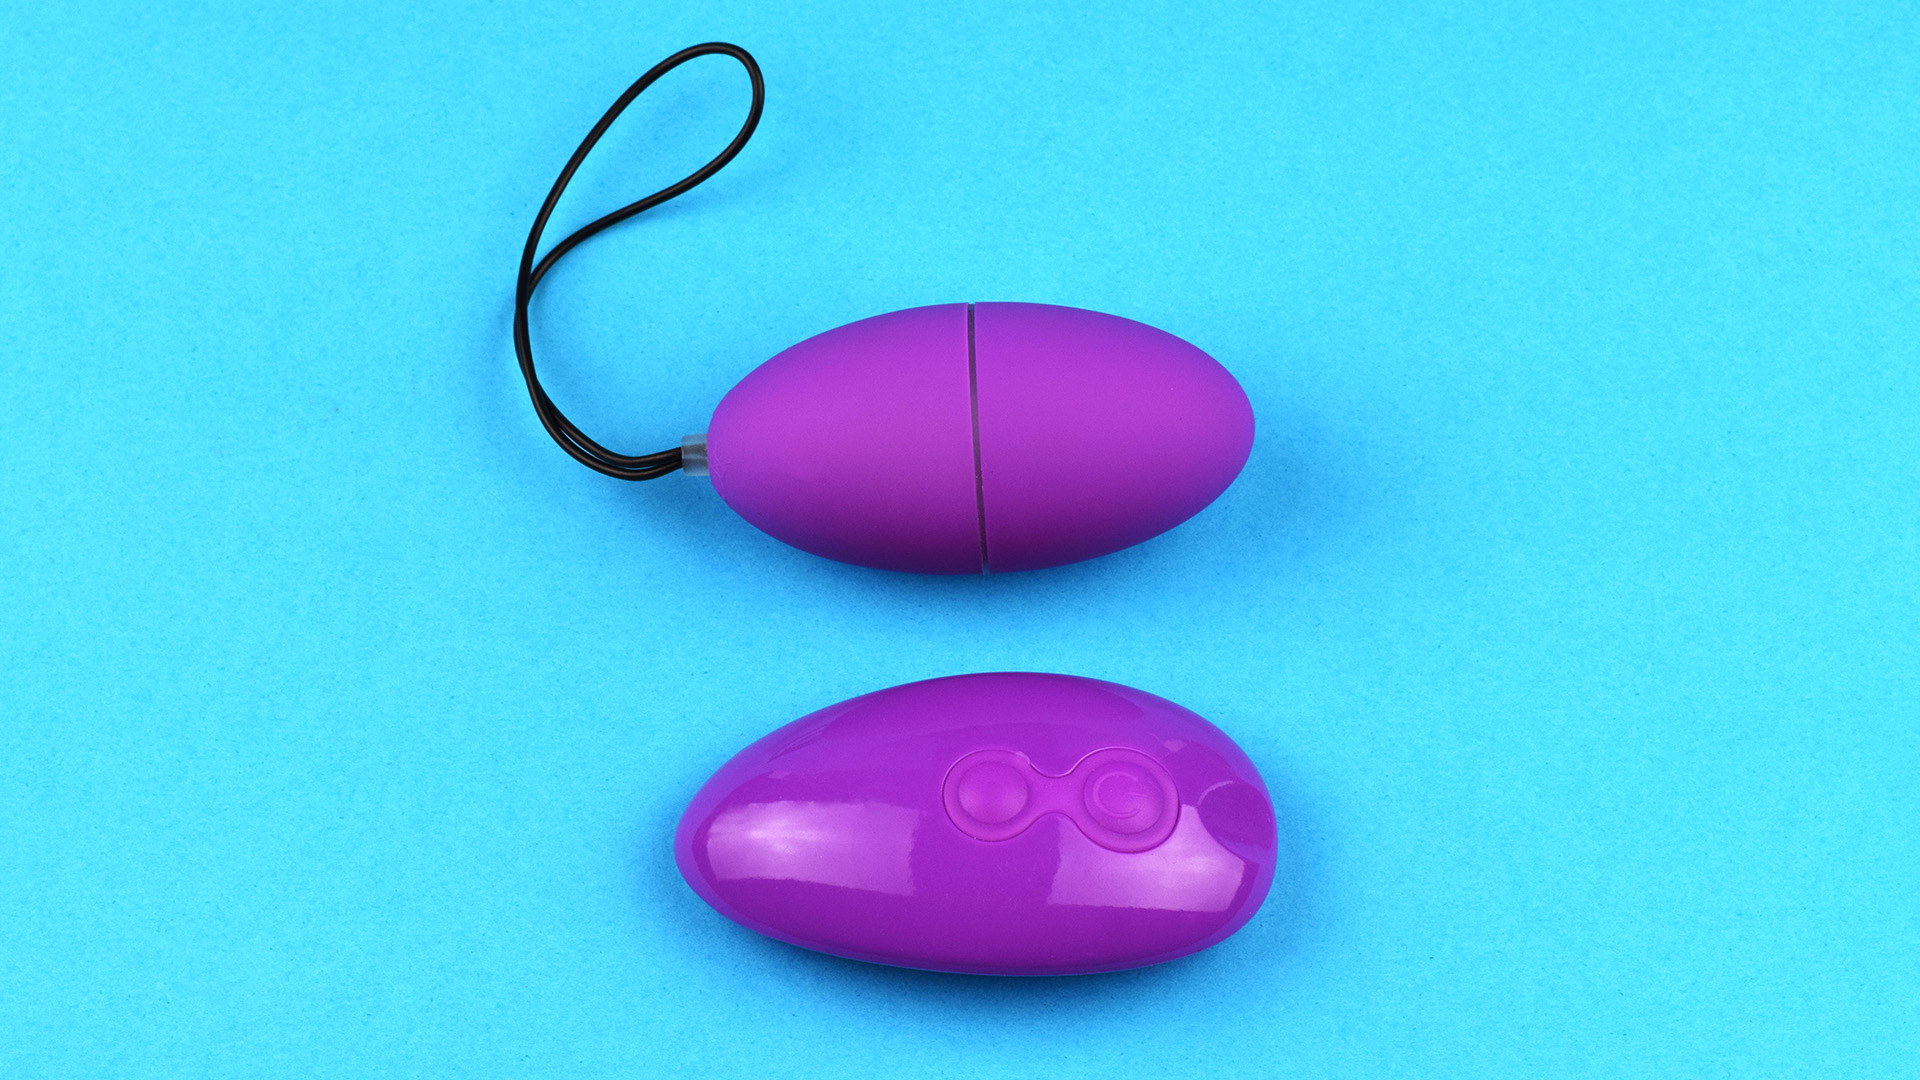 Remote controlled purple egg vibrator next to purple wireless remote. Light turquoise background.